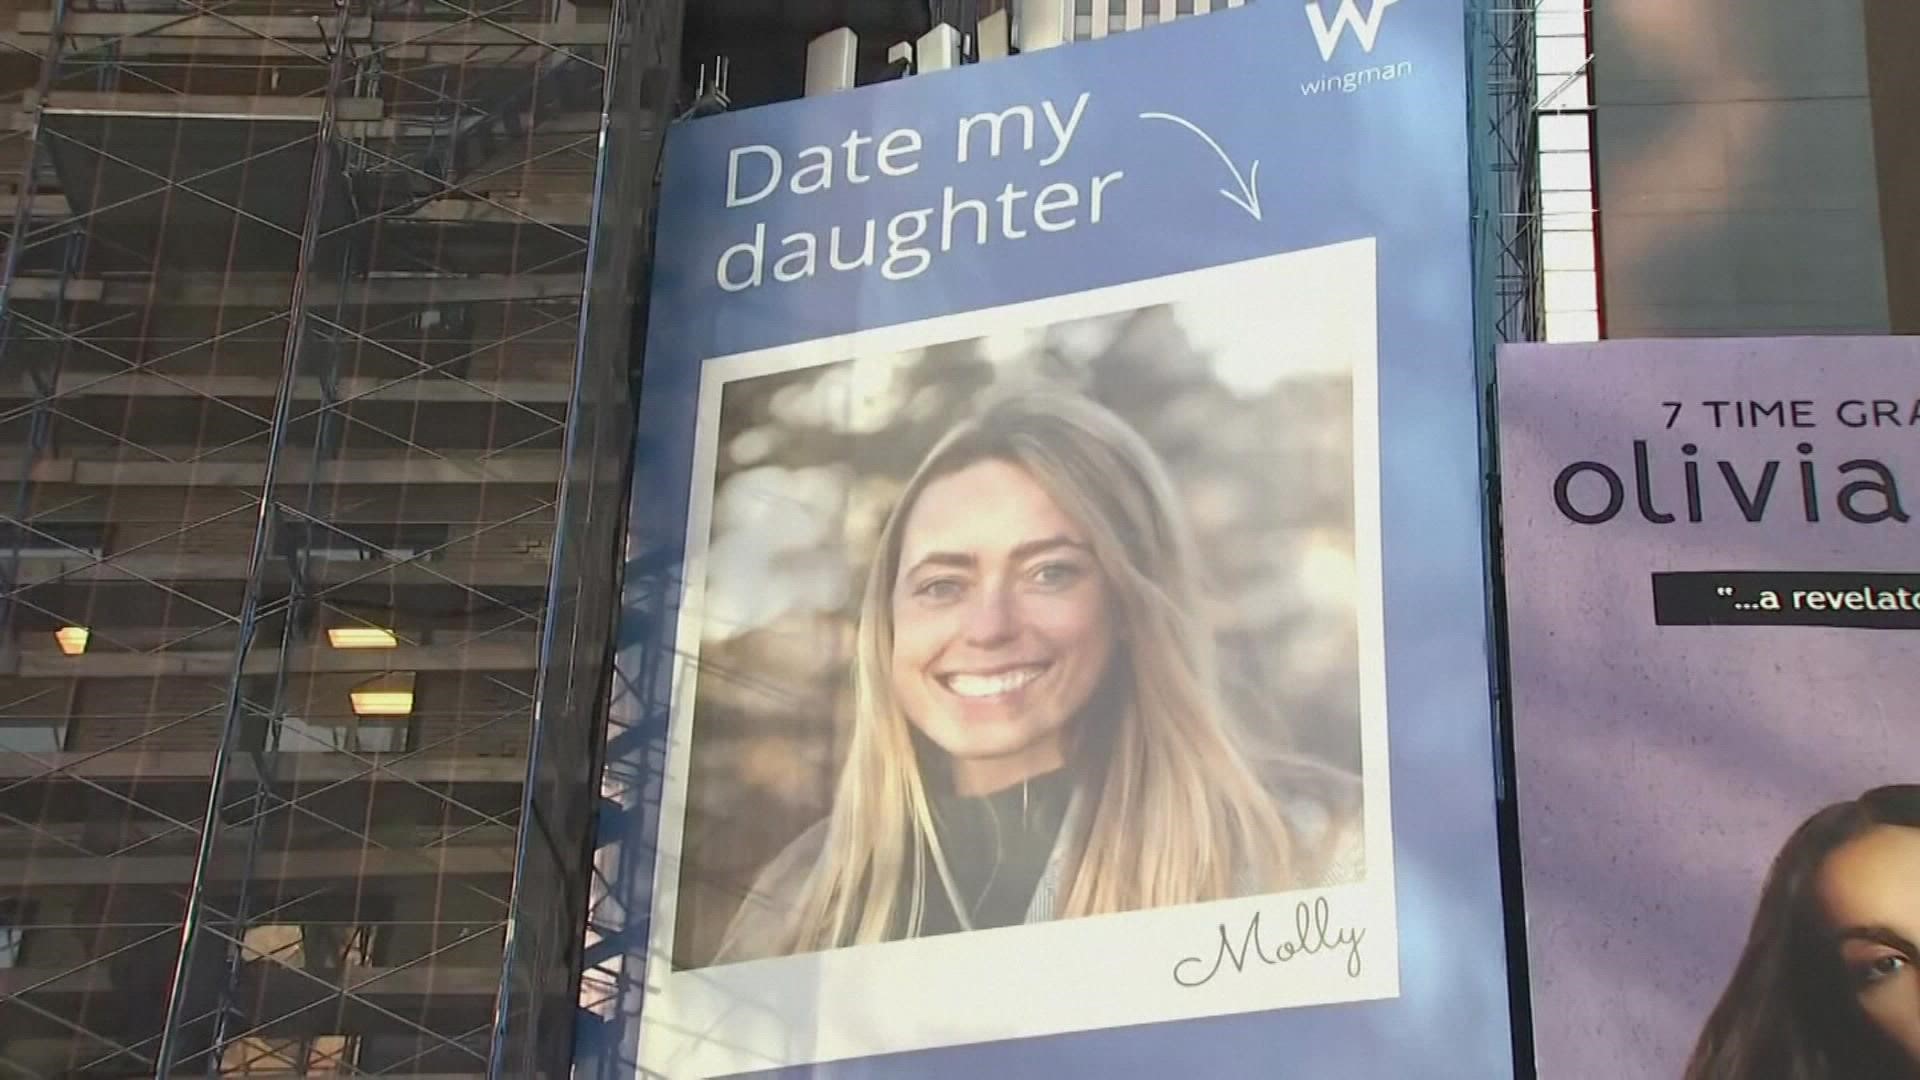 A photo of Molly Davis is larger than life in one of the world's busiest intersections - thanks to her mom.